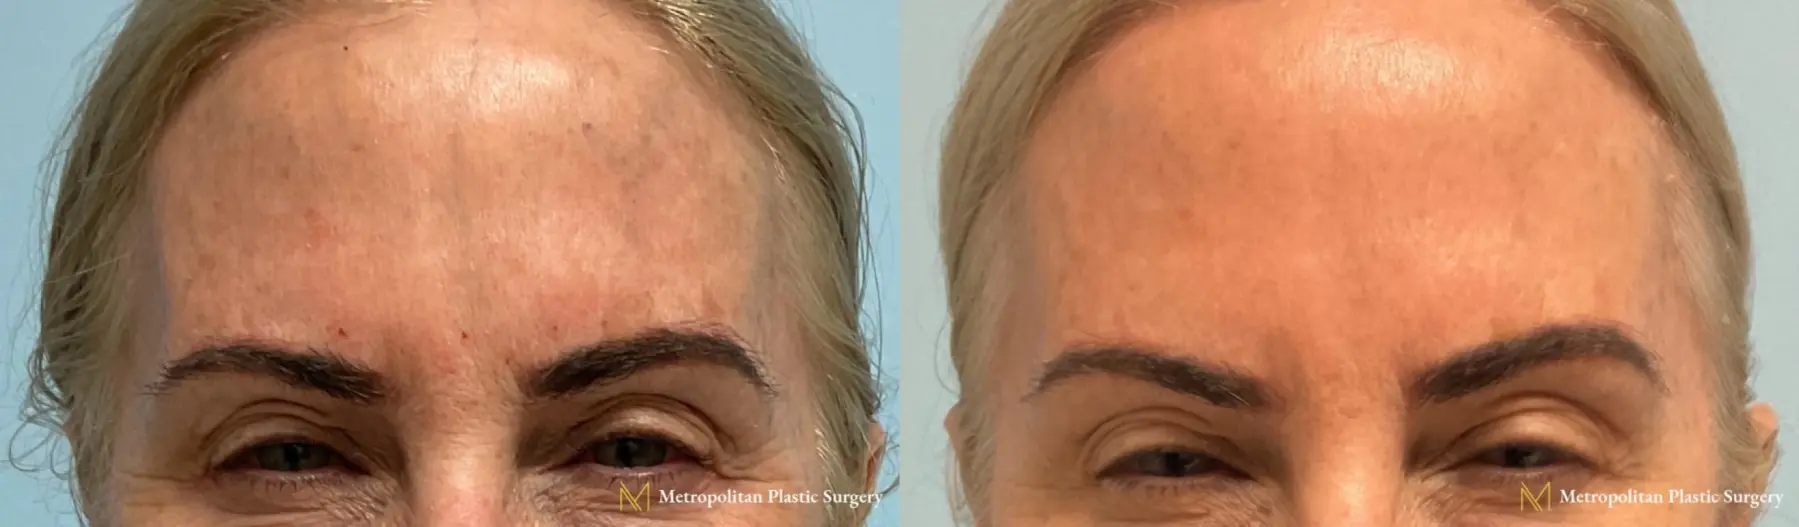 BOTOX® Cosmetic: Patient 5 - Before and After  